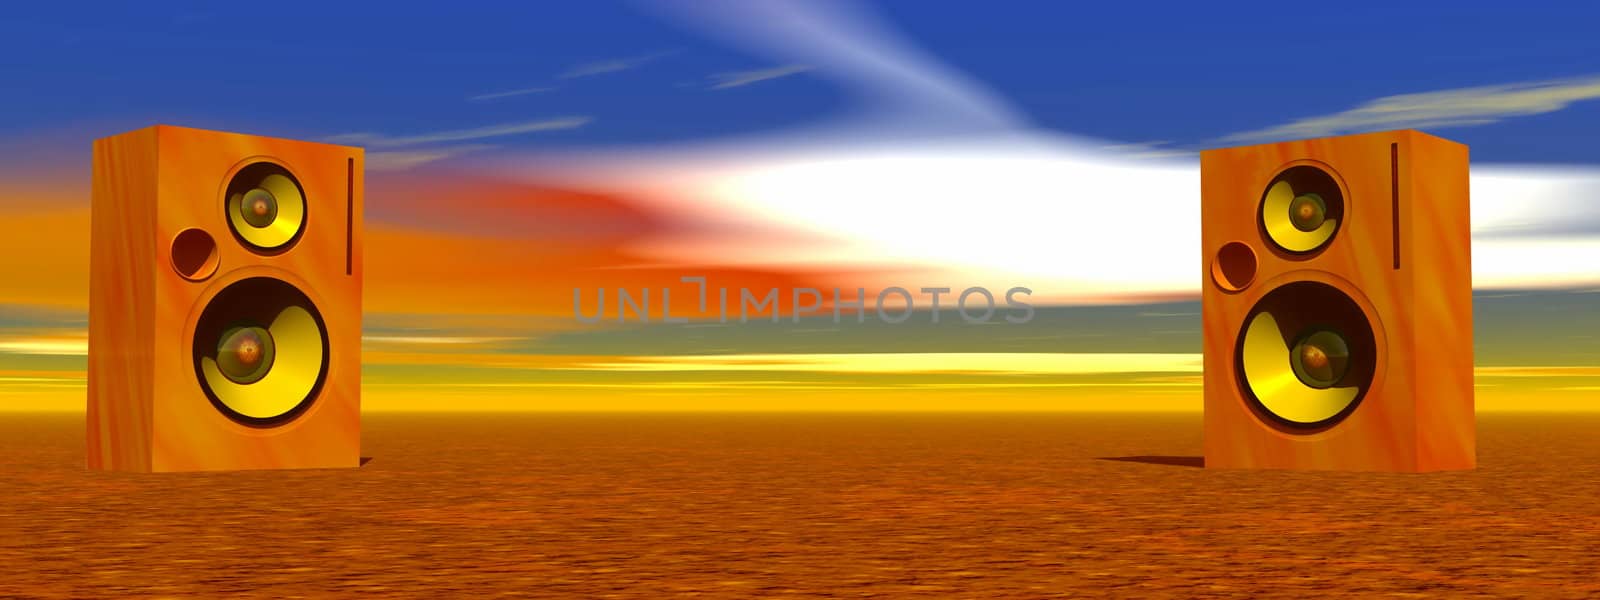 Pair of speakers standing on the ground in the desert with colorful sky